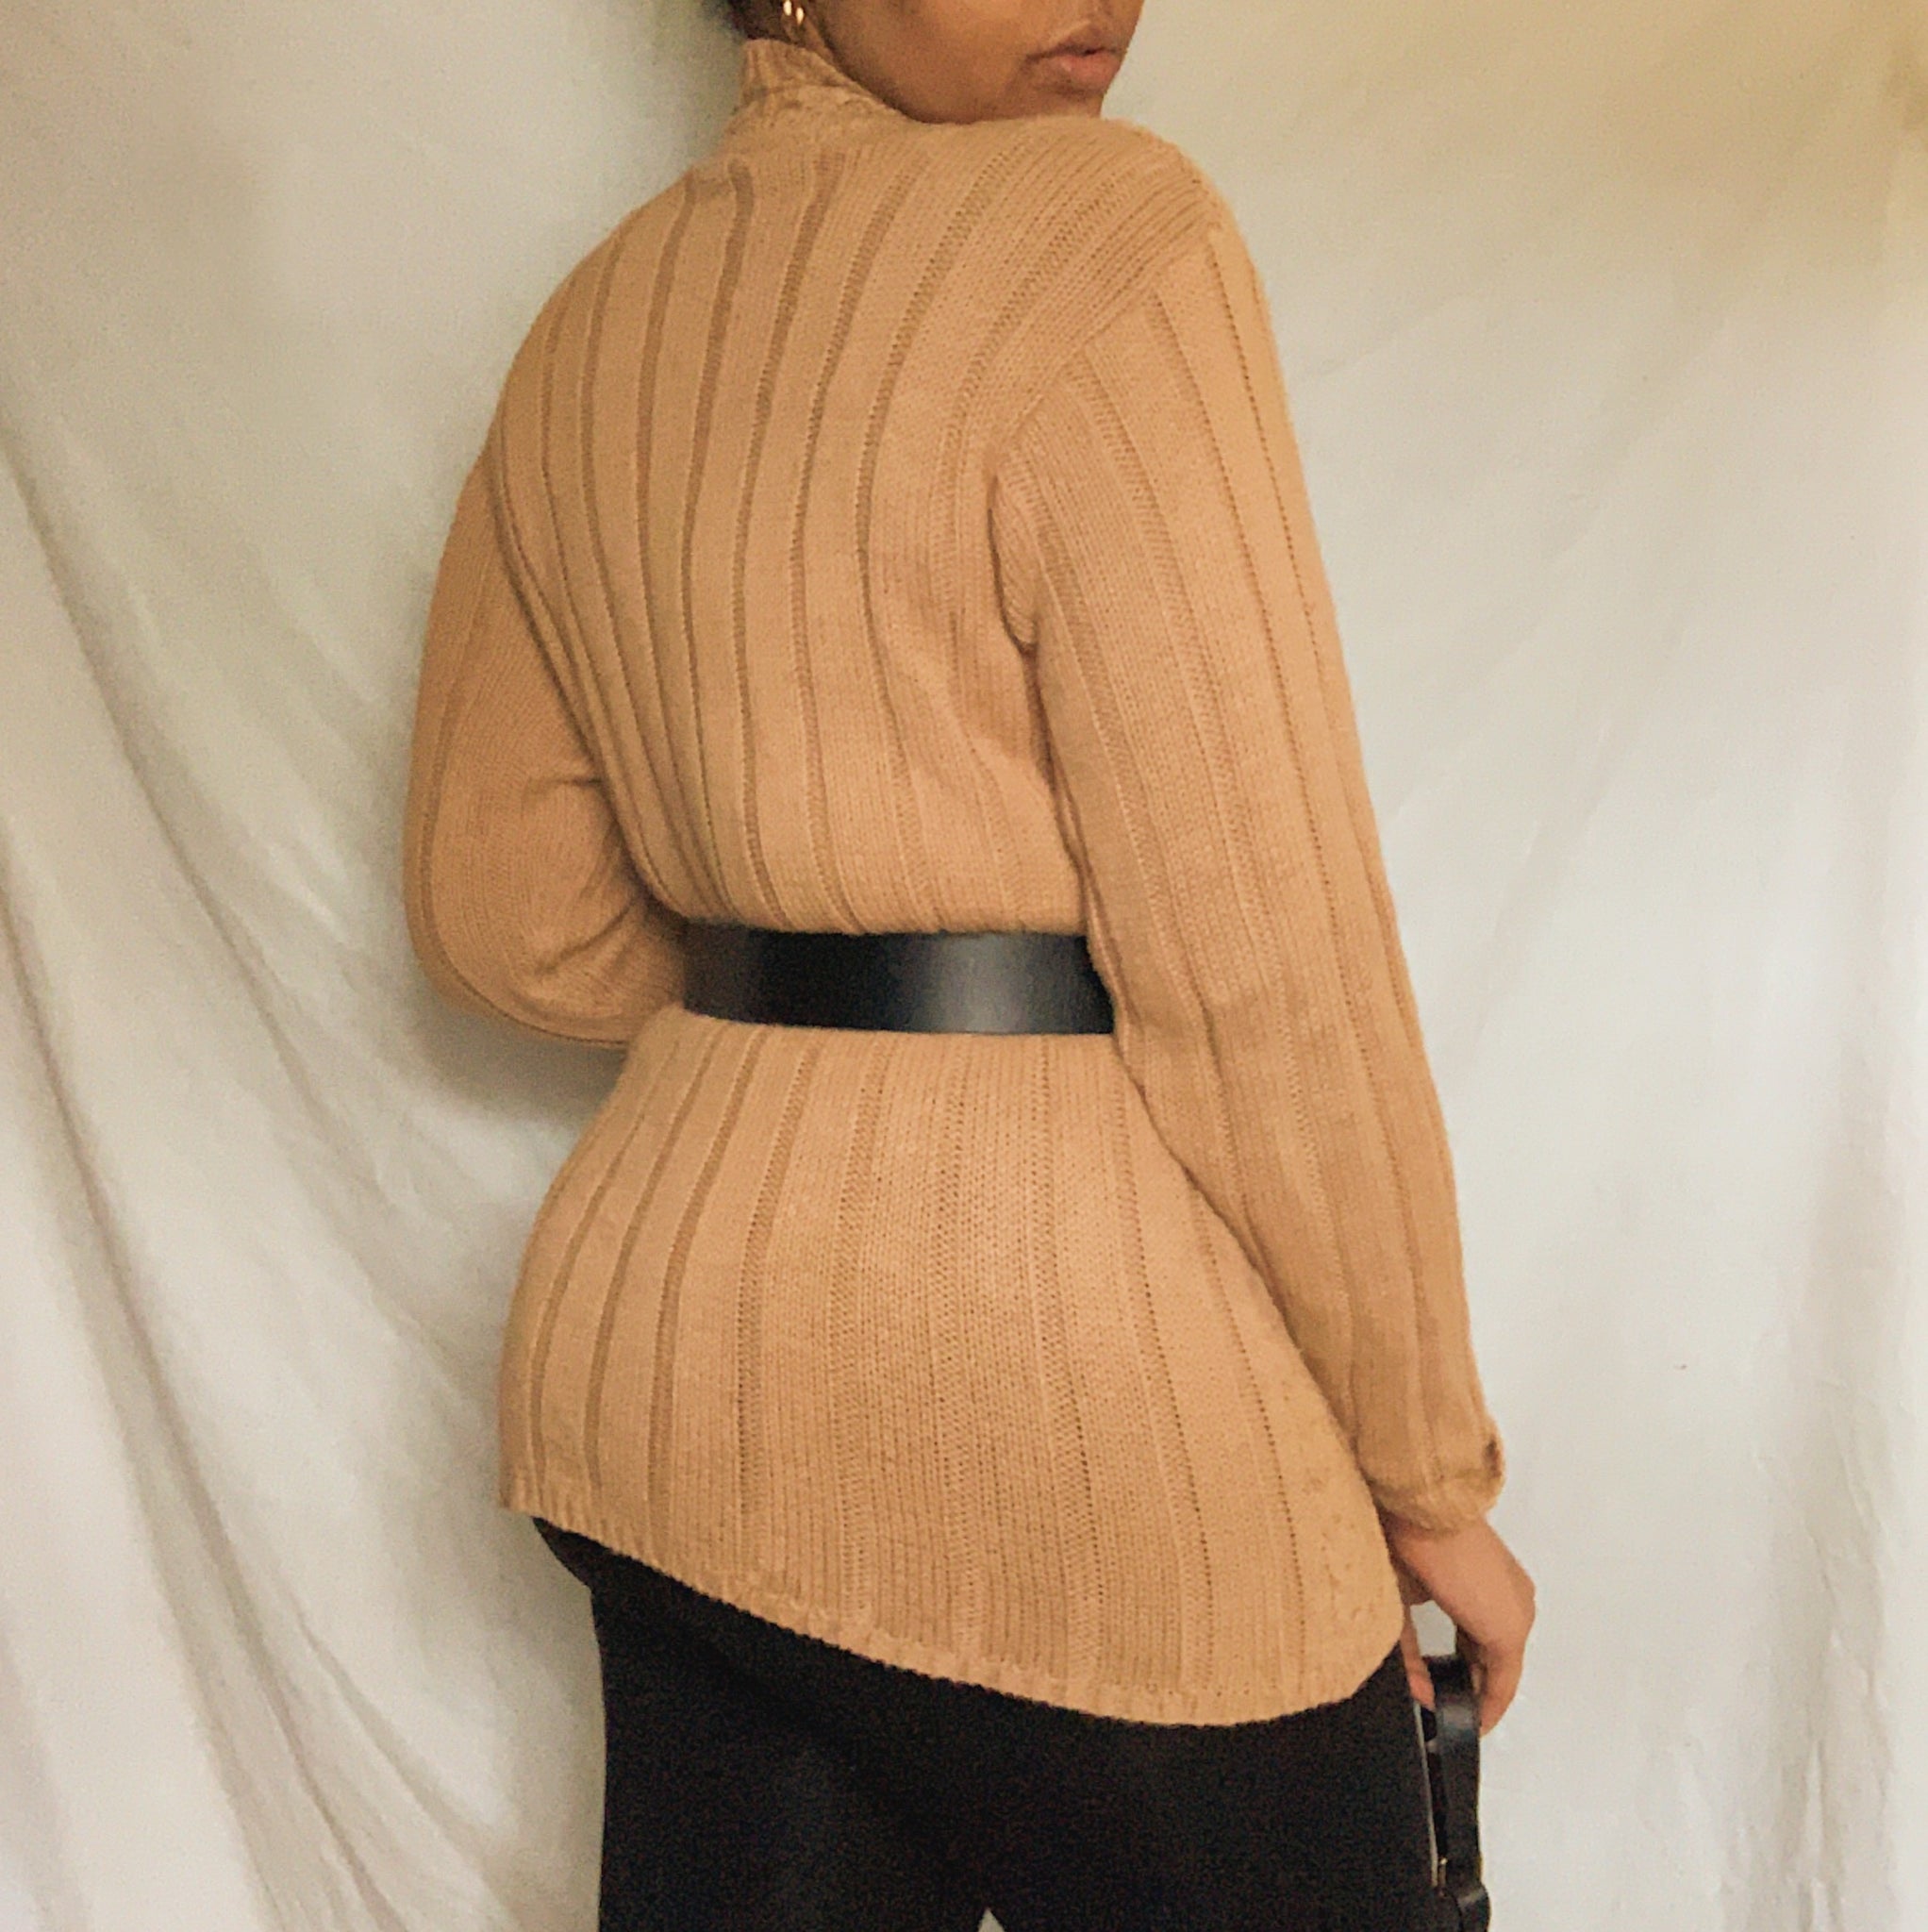 Camel Brown Cable Knit Mock Neck Sweater (M-XL)